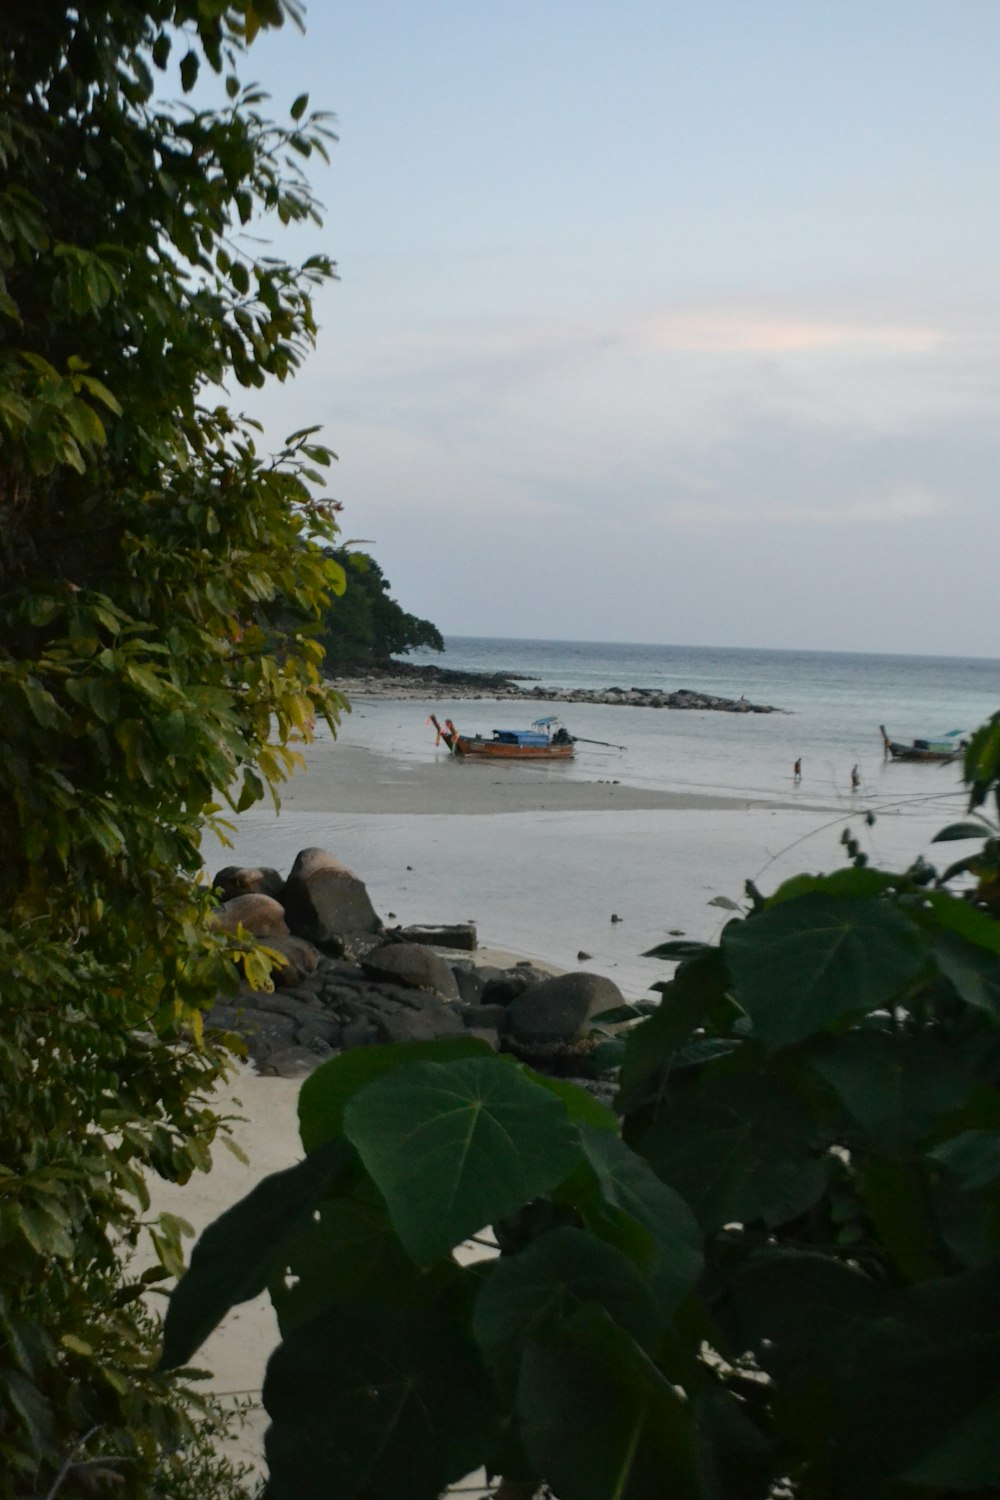 a view of a beach with a boat in the water